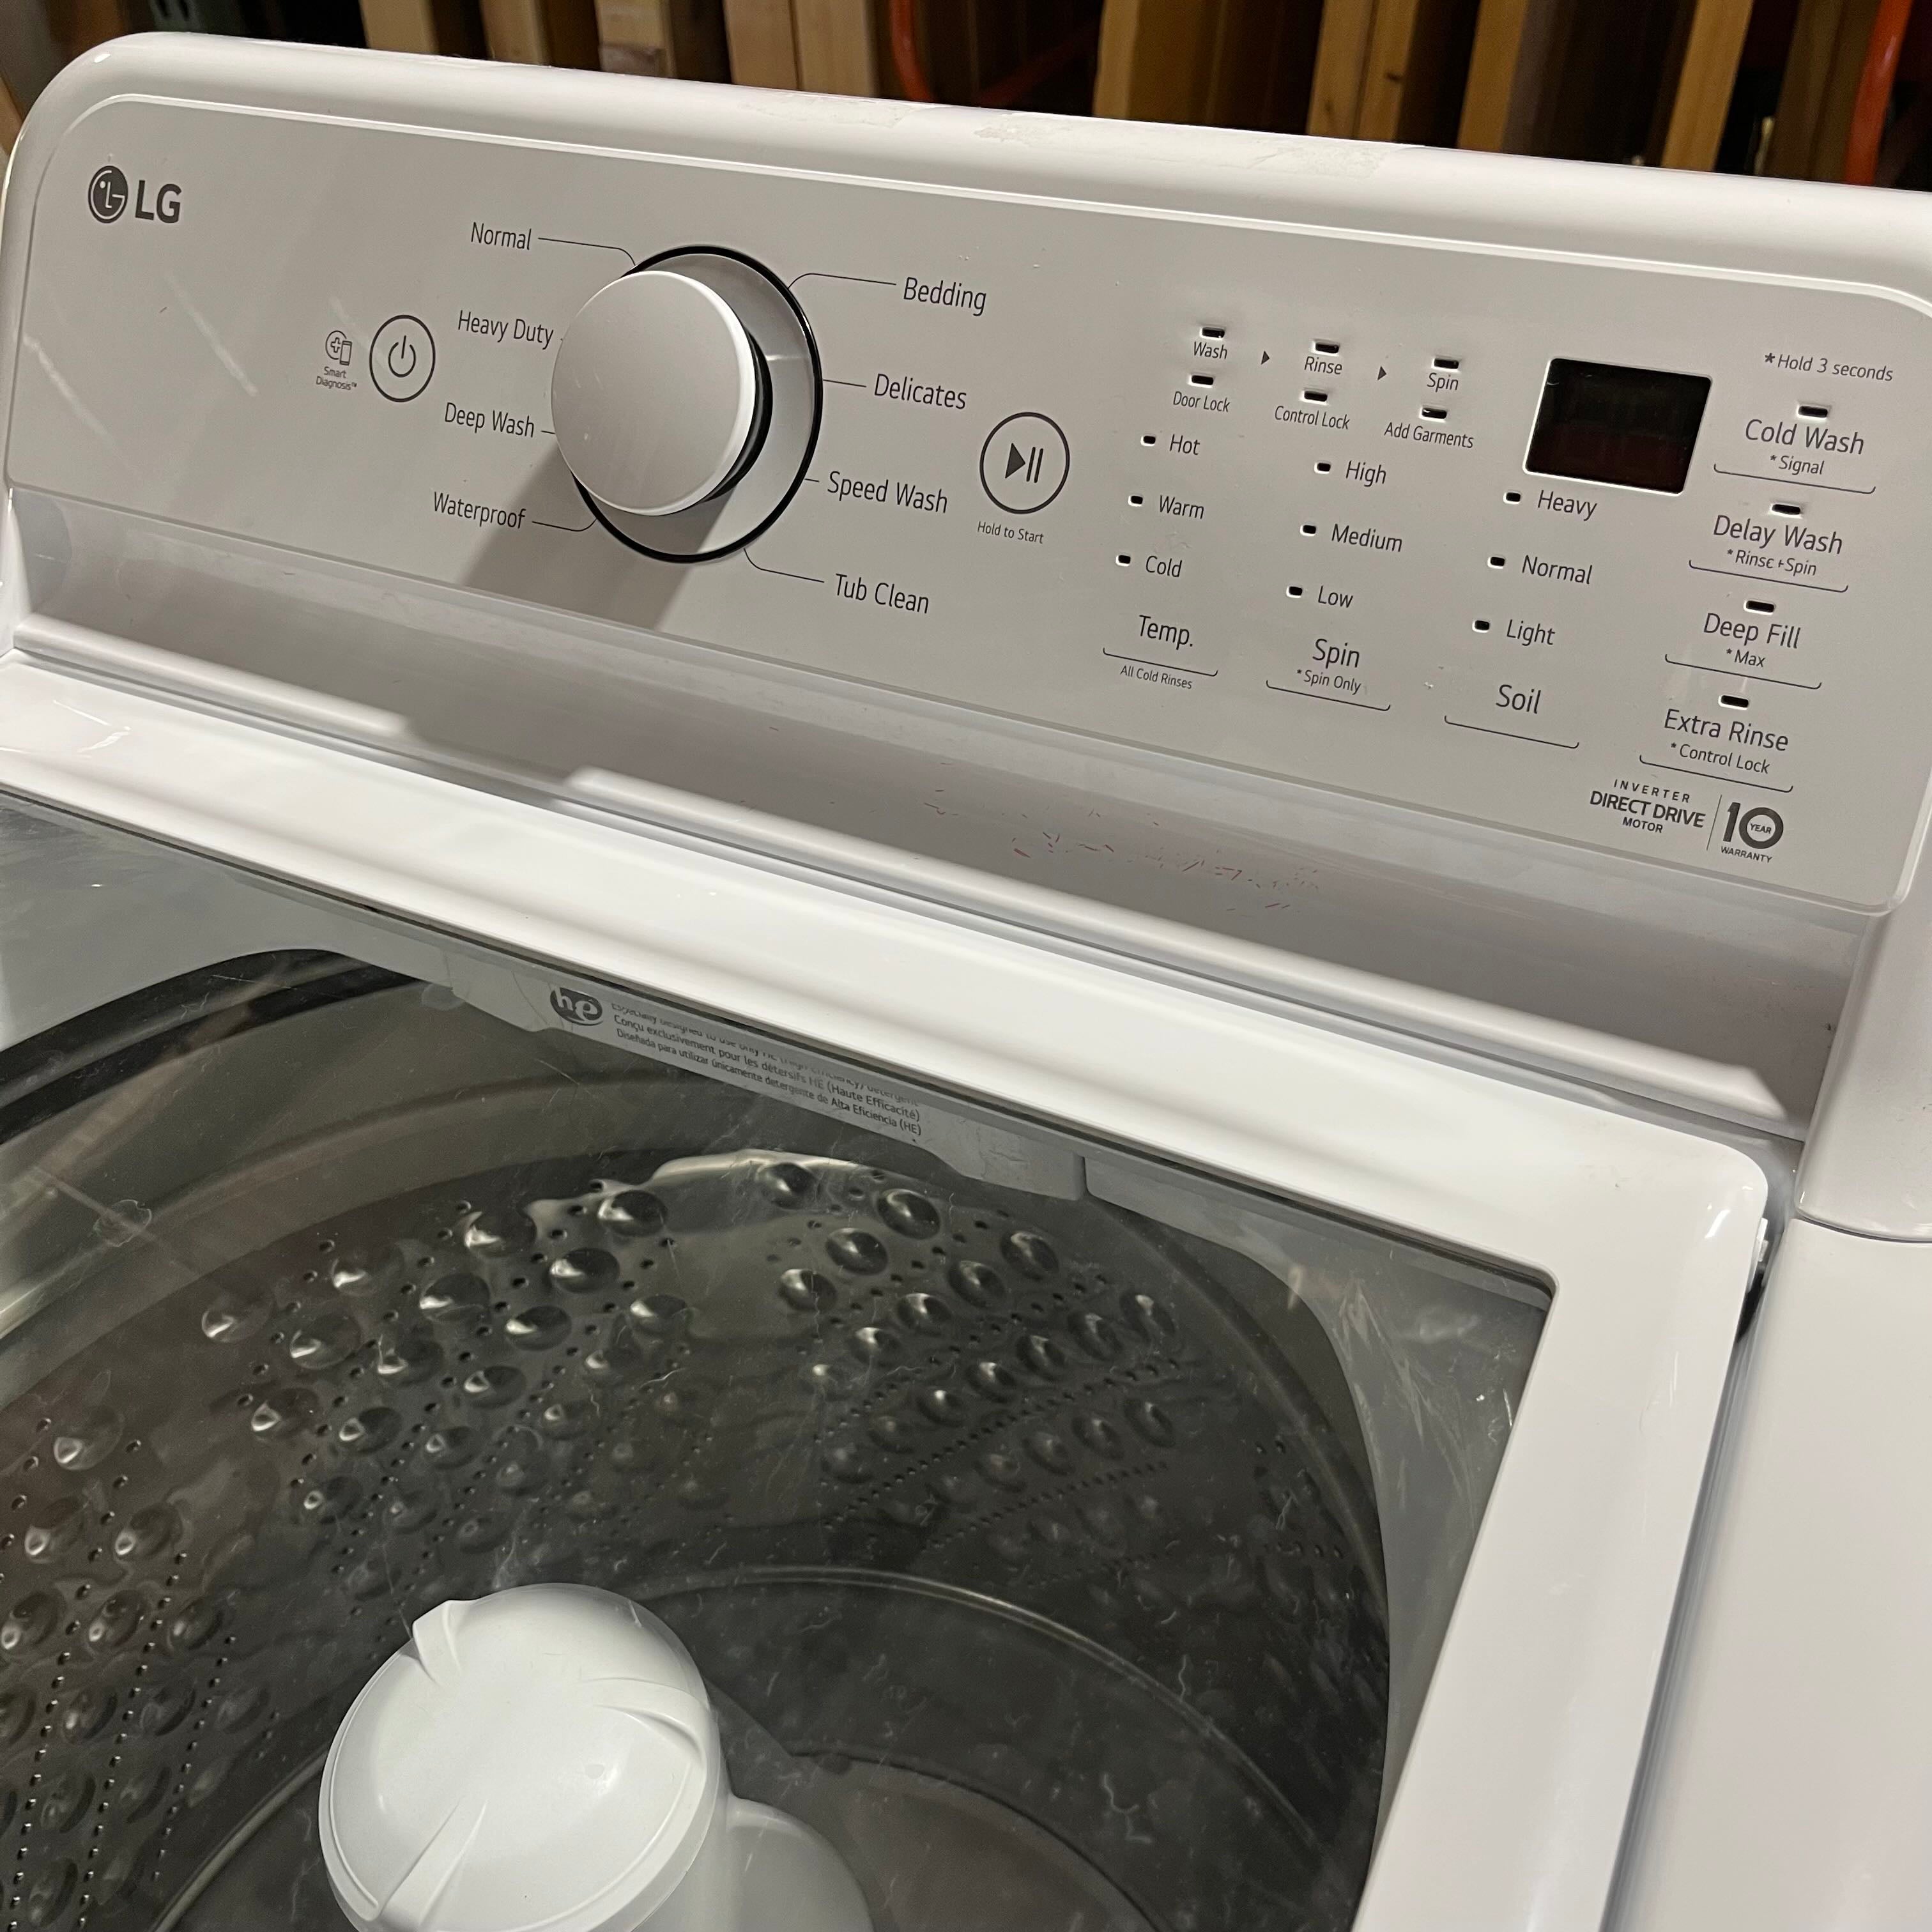 F3923 LG Large Capacity Top Load White Washer